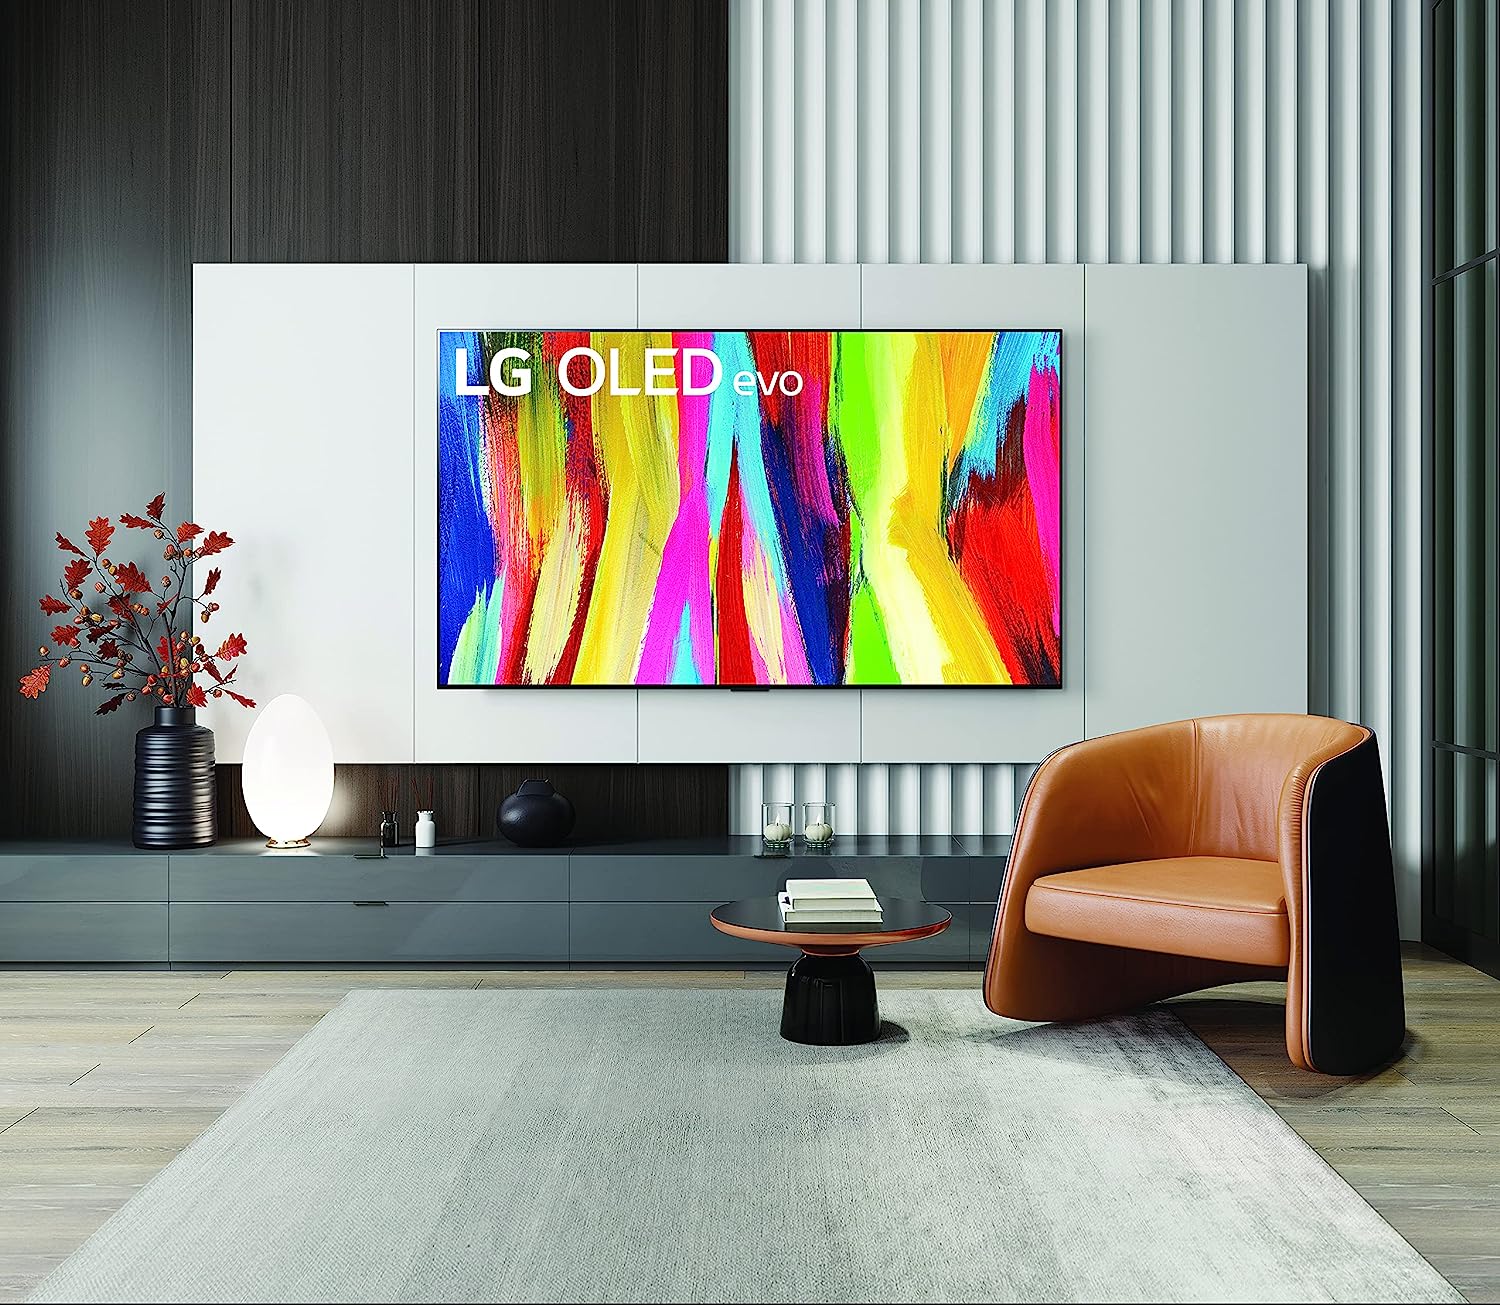 LG C3 vs C2: which LG OLED TV should you buy?